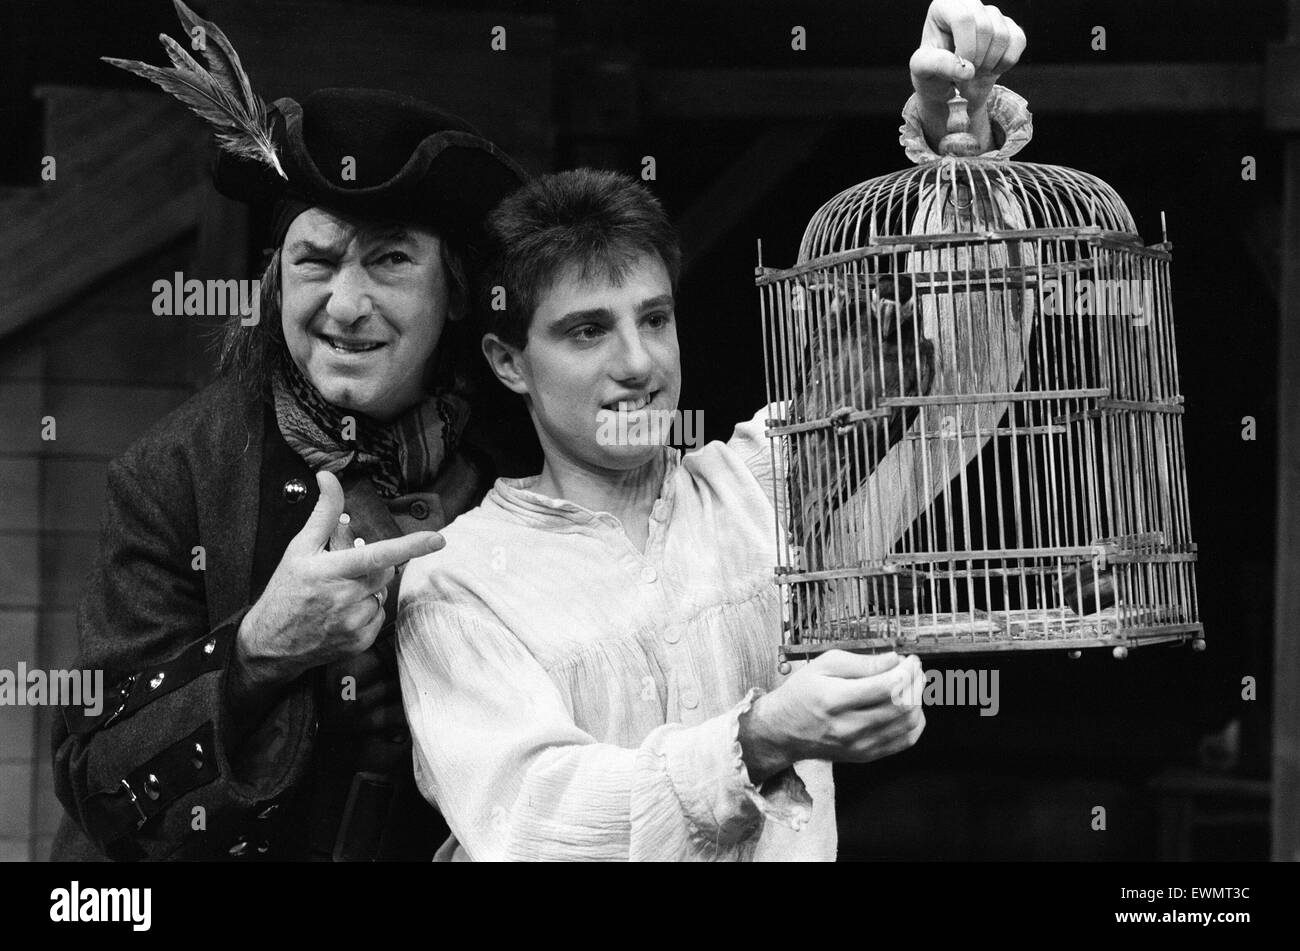 Treasure Island, Pantomime, Photo-call, Birmingham Repertory Theatre, Birmingham, 20th December 1984. Jack Douglas, comedian, plays Long John Silver, pictured with live parrot in the role of Captain Flint. Stock Photo